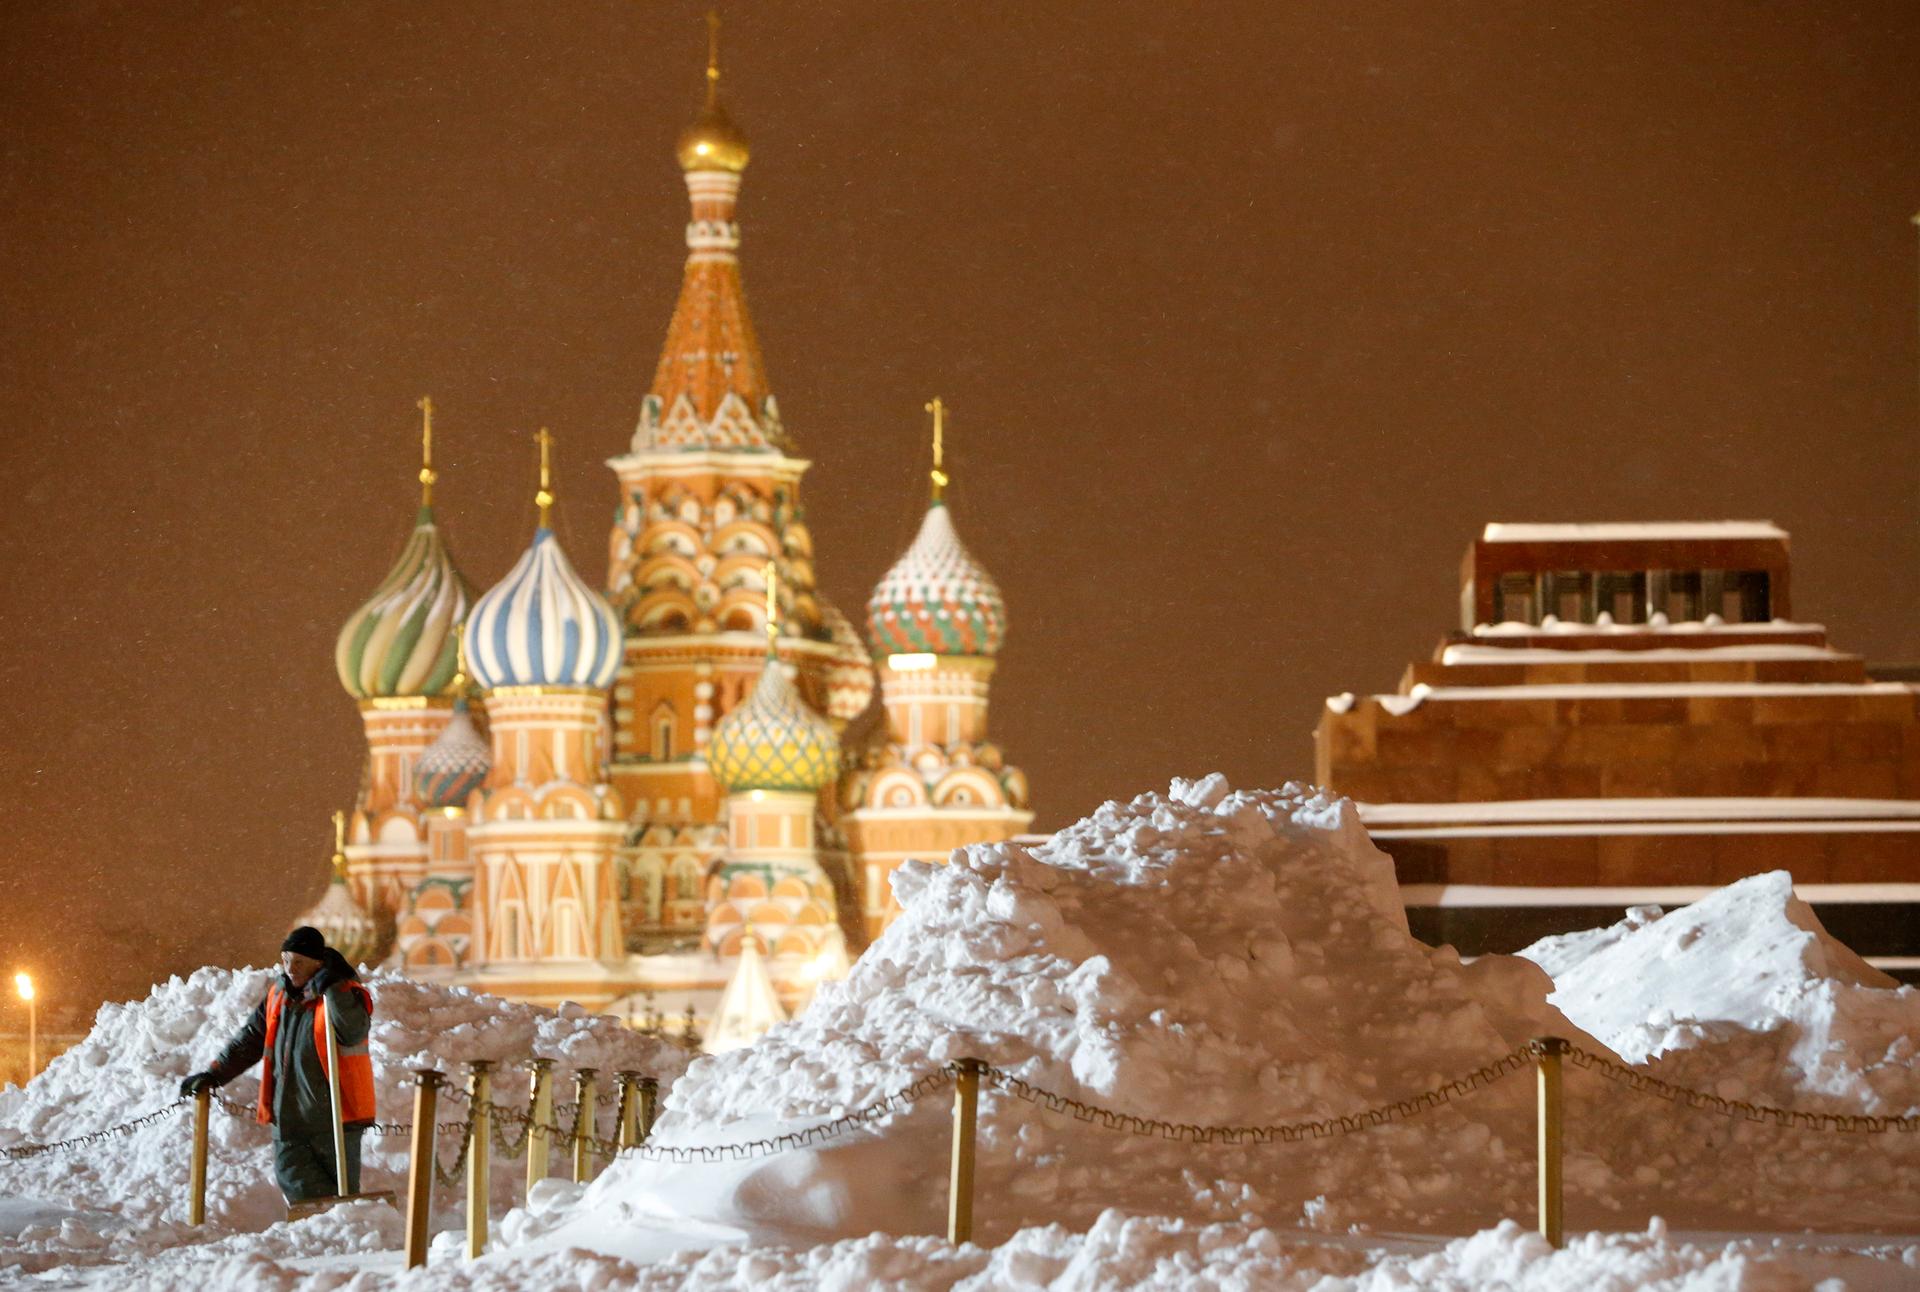 A worker removes snow in Red Square with St. Basil's Cathedral and the mausoleum of Soviet state founder Vladimir Lenin in the background.